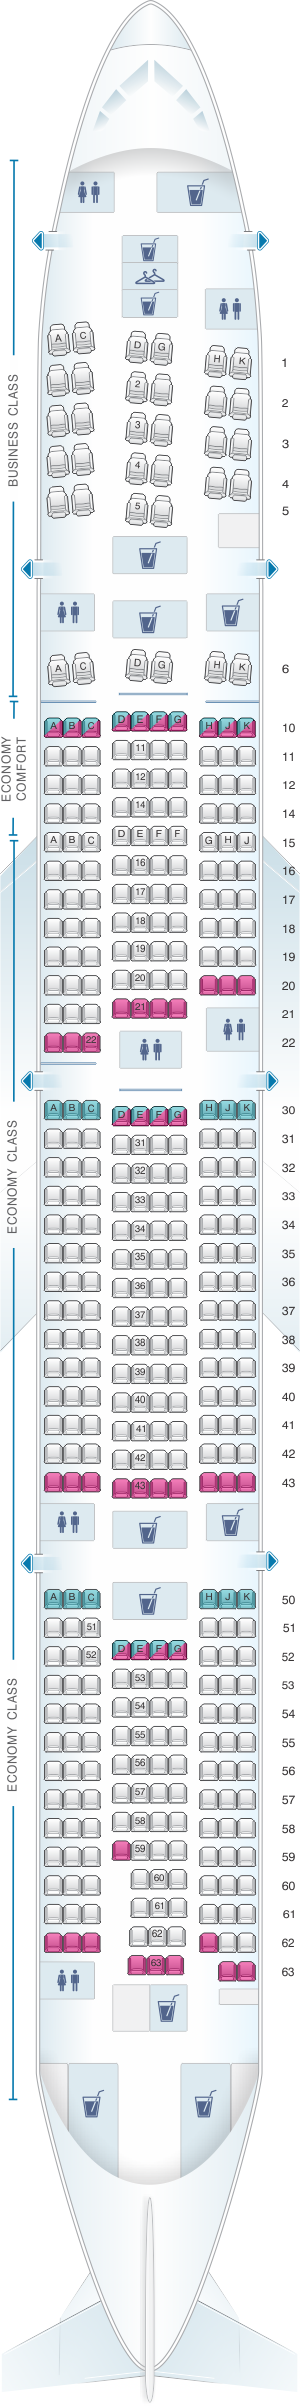 Seat map for KLM Boeing B777 300ER New World Business Class